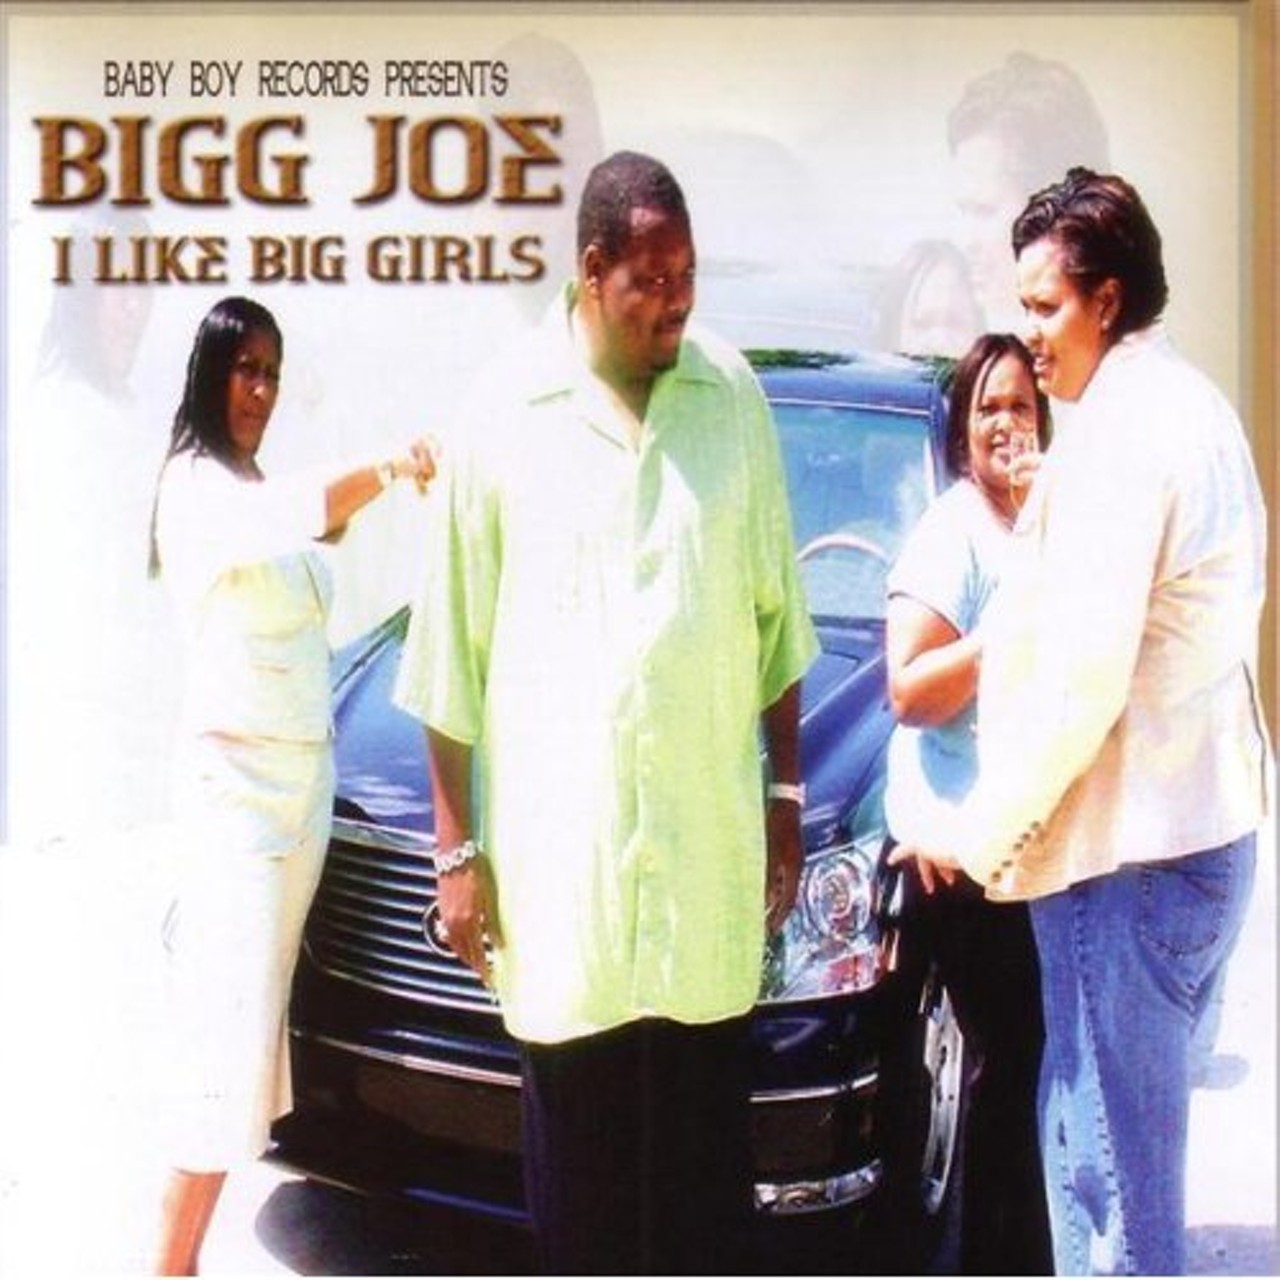 Bigg Joe: I Like Big Girls -- Bigg Joe will not lie, you other brothers might deny. And from the atmosphere of peace that pervades Joe and his three women, it looks like he might have it going on Big Love style too. But Bigg Joe doesn't like them as big as...